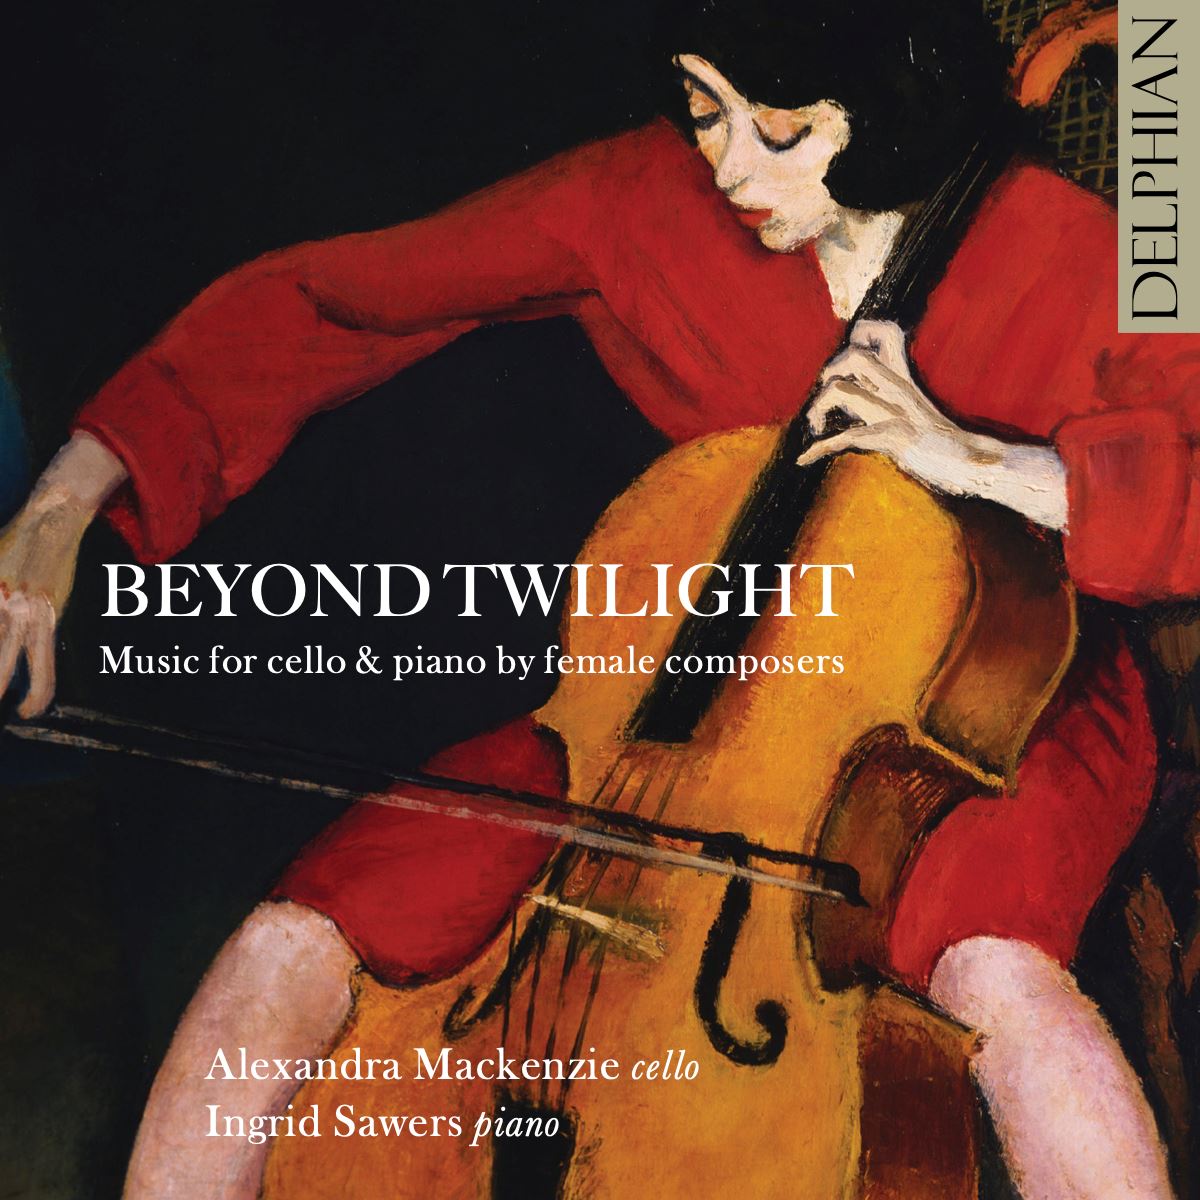 Beyond Twilight: Music for cello & piano by female composers